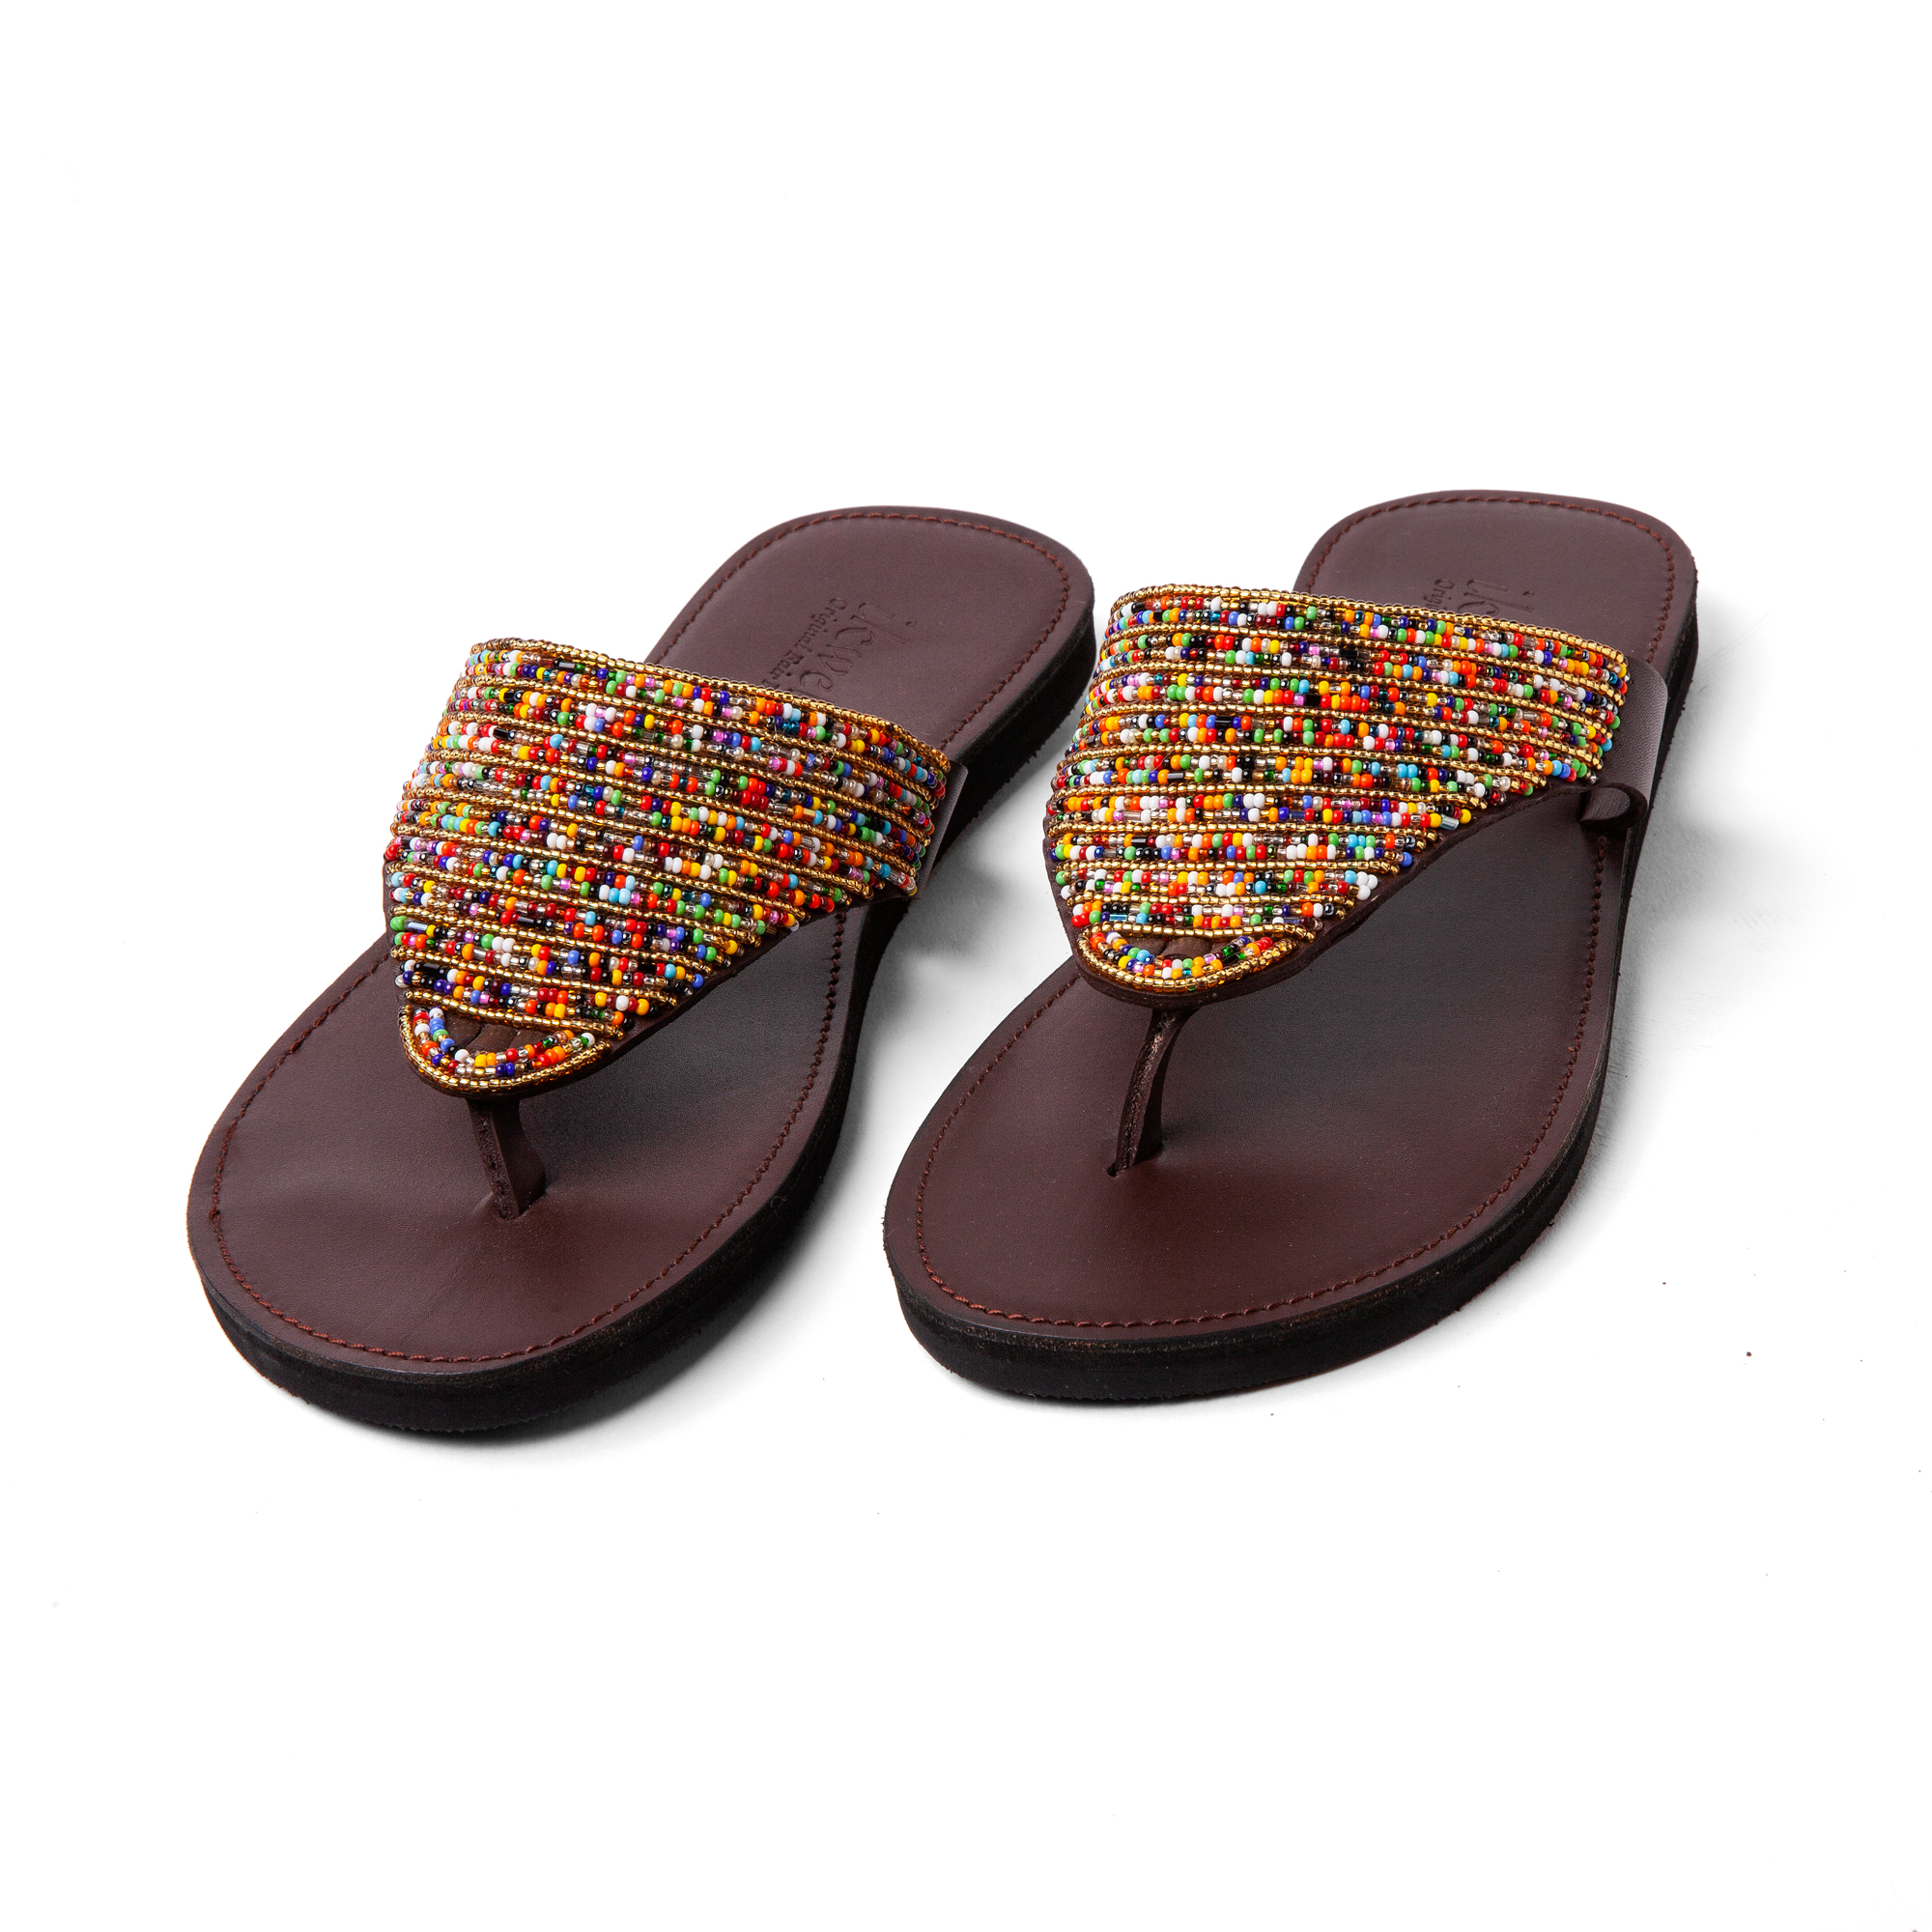 bead sandals without sole